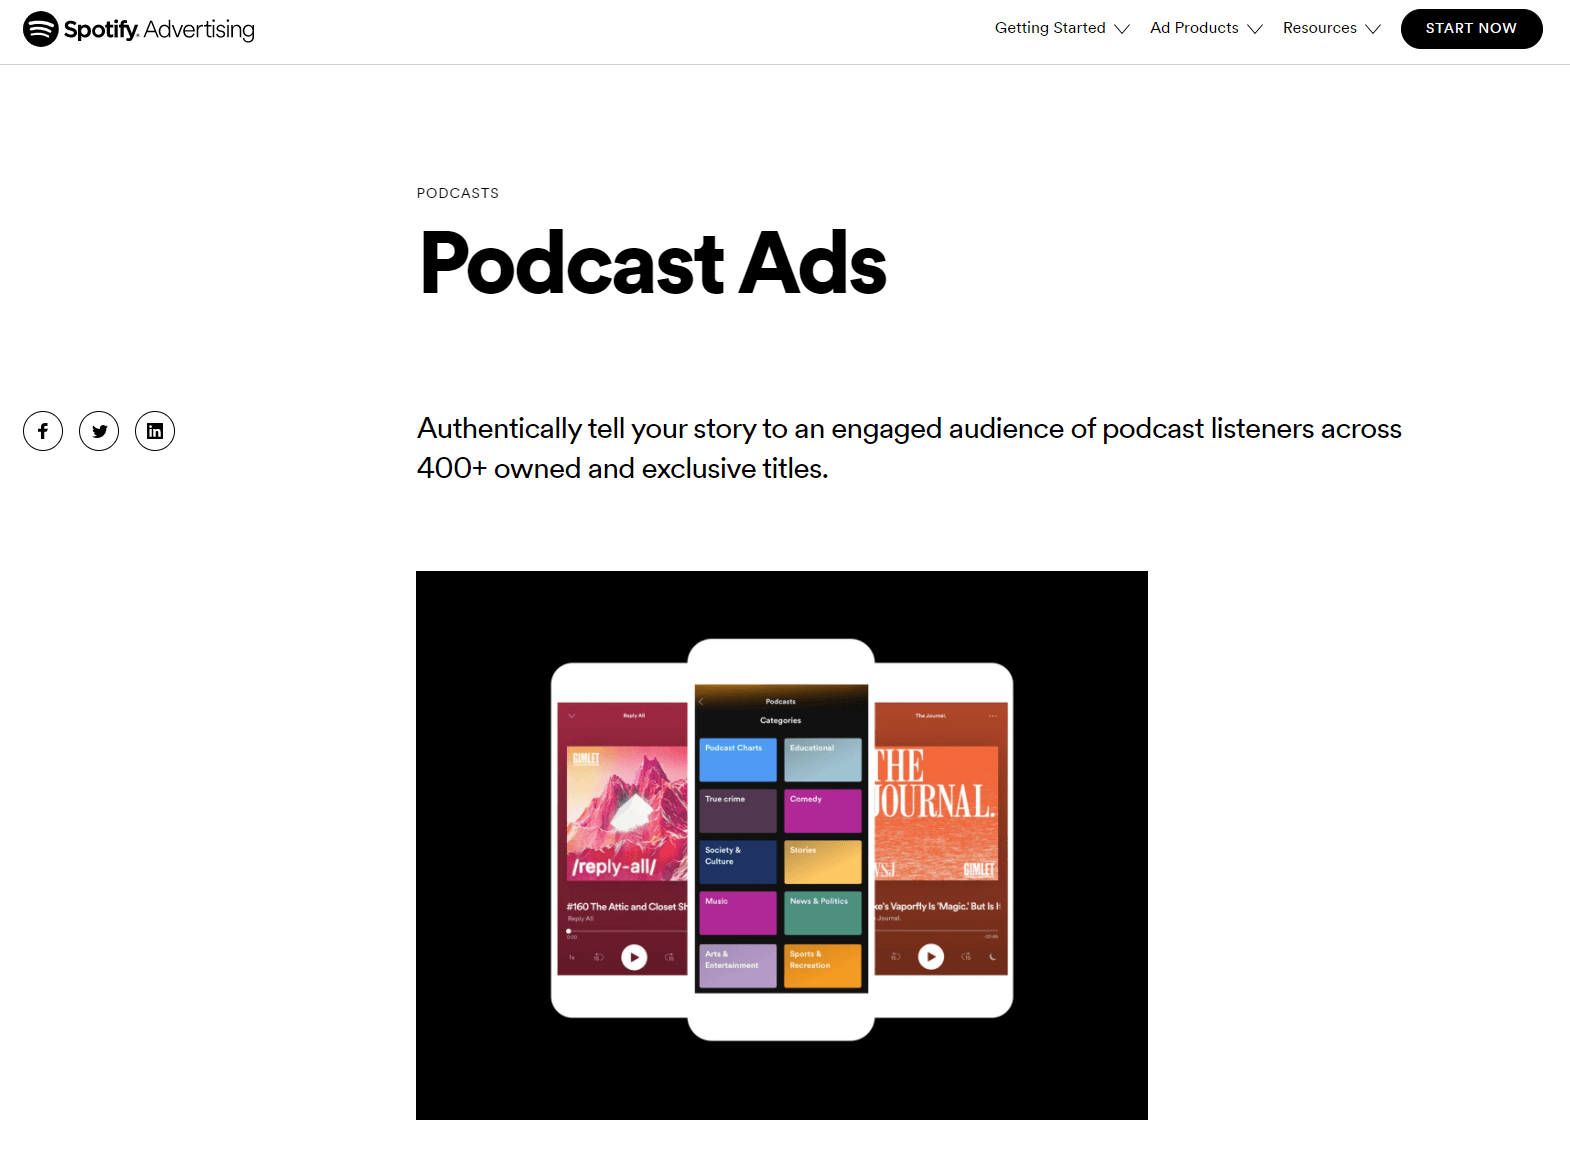 Podcast-Ads-Spotify-Advertising (1)